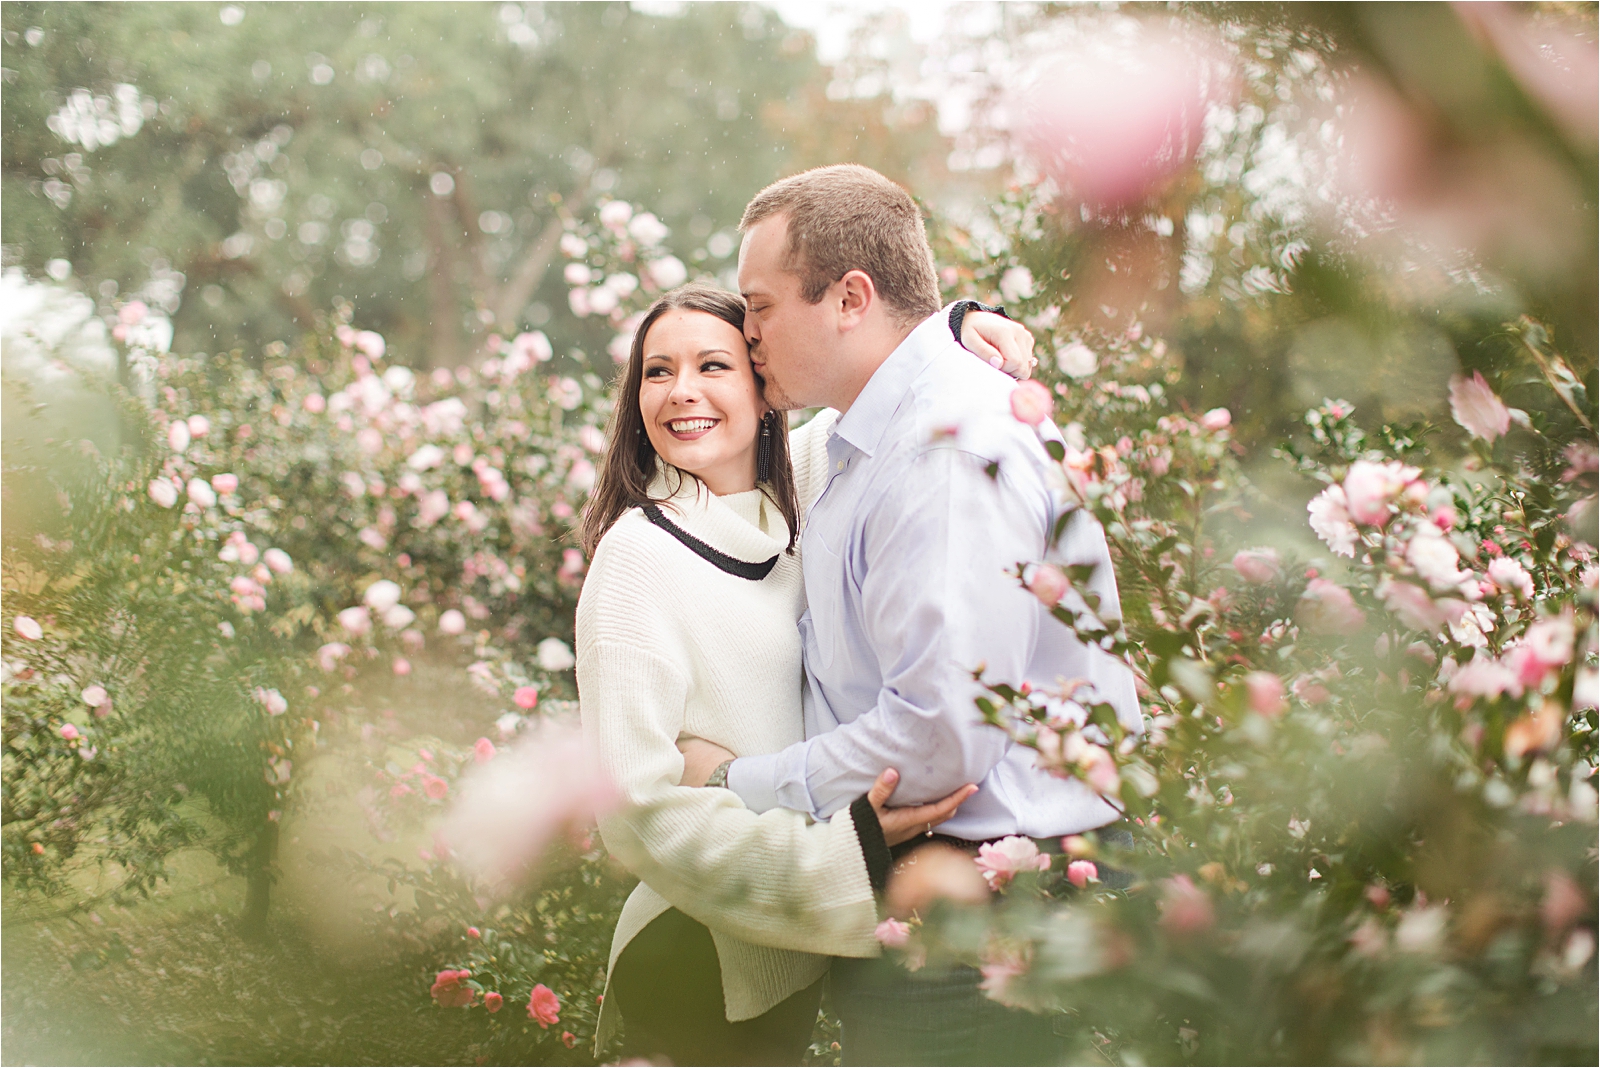 Autumn Engagement Session in the Rain | Courtney + Ben